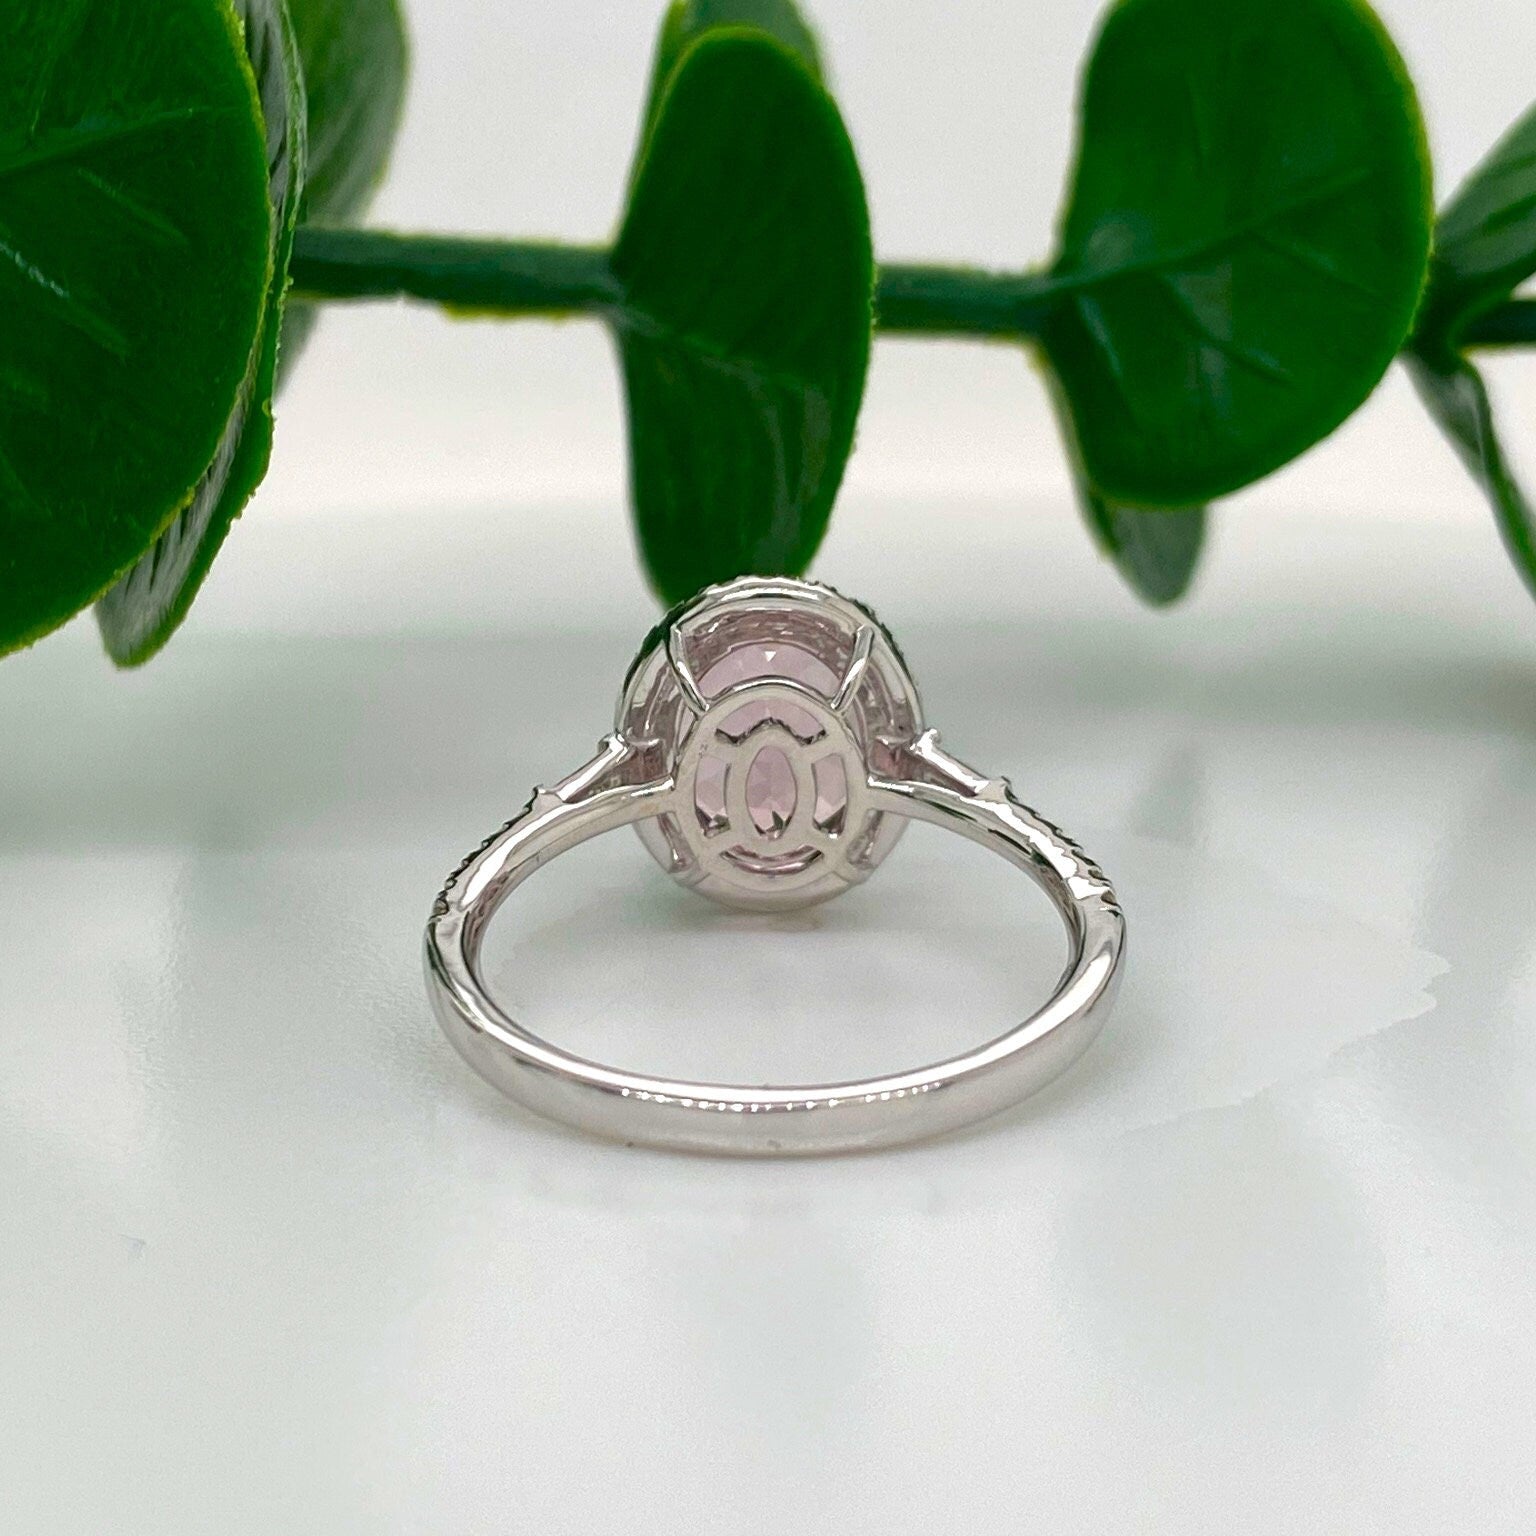 Pink Morganite Diamond Halo Ring in Solid 14K White Gold w Diamond Accents | Oval 10x8mm | Natural Gemstone | June Birthday | Ready to Ship!